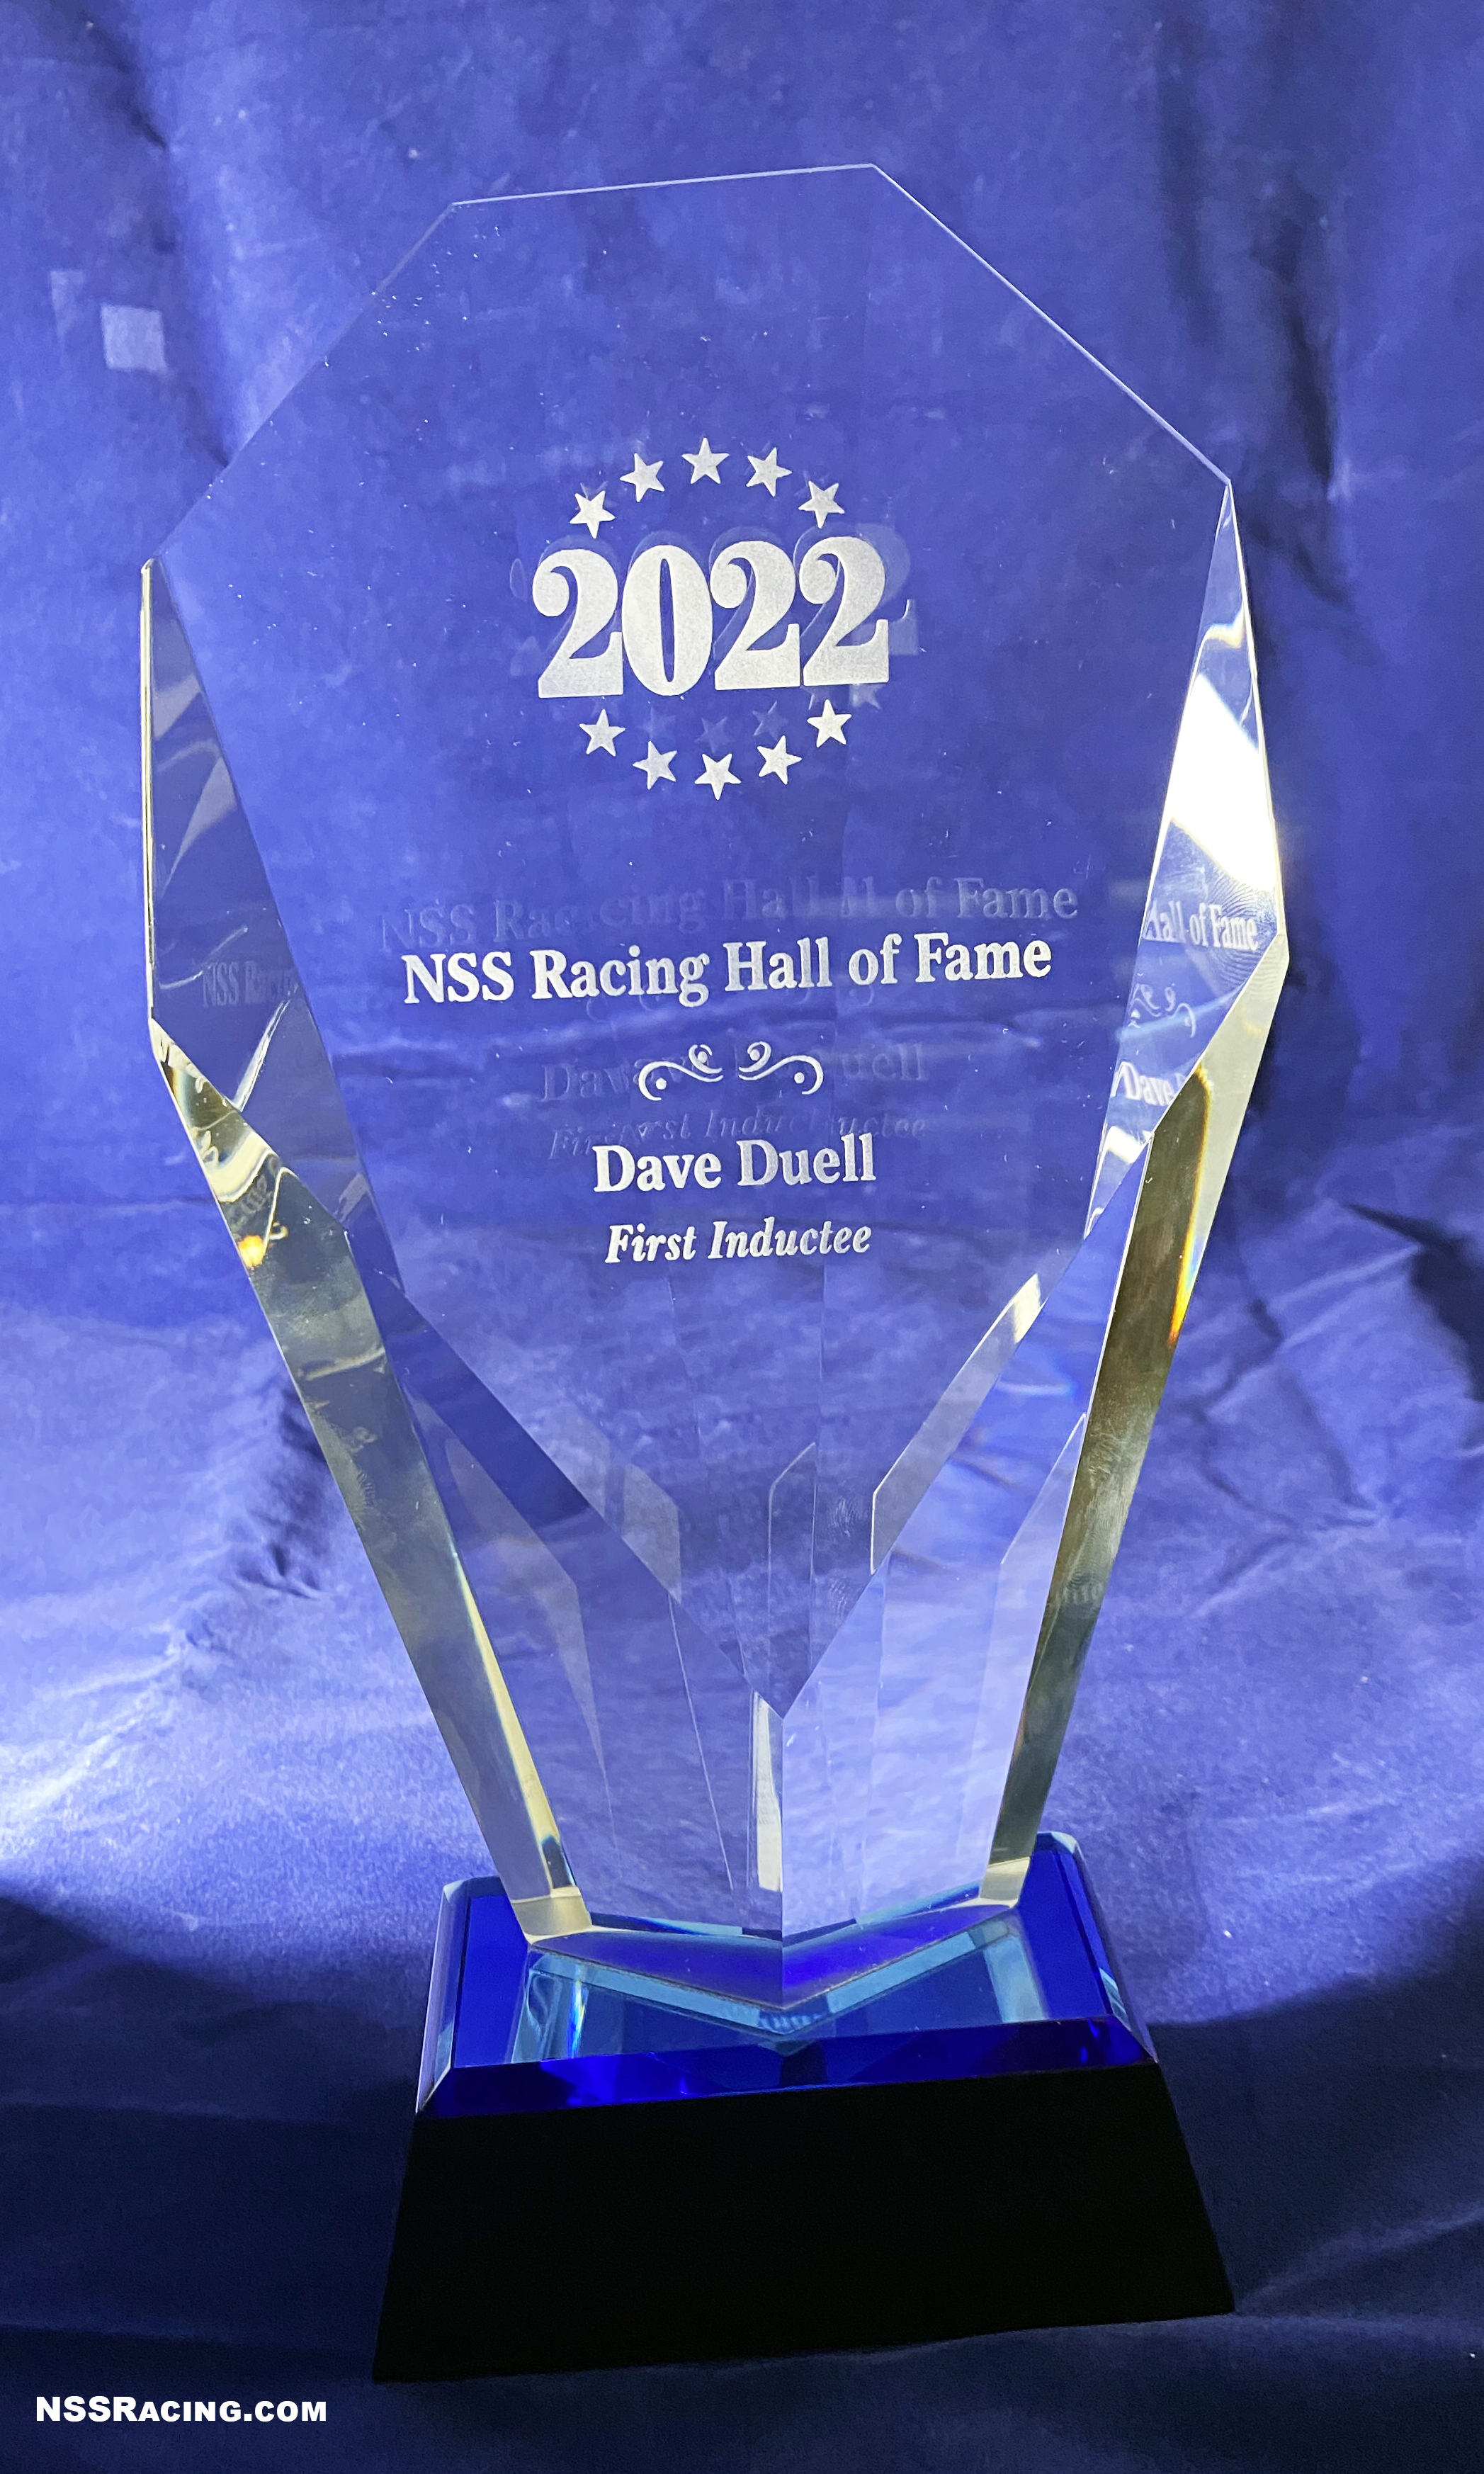 Dave Duell is the First Inductee to the NSSRacing.com Hall of Fame